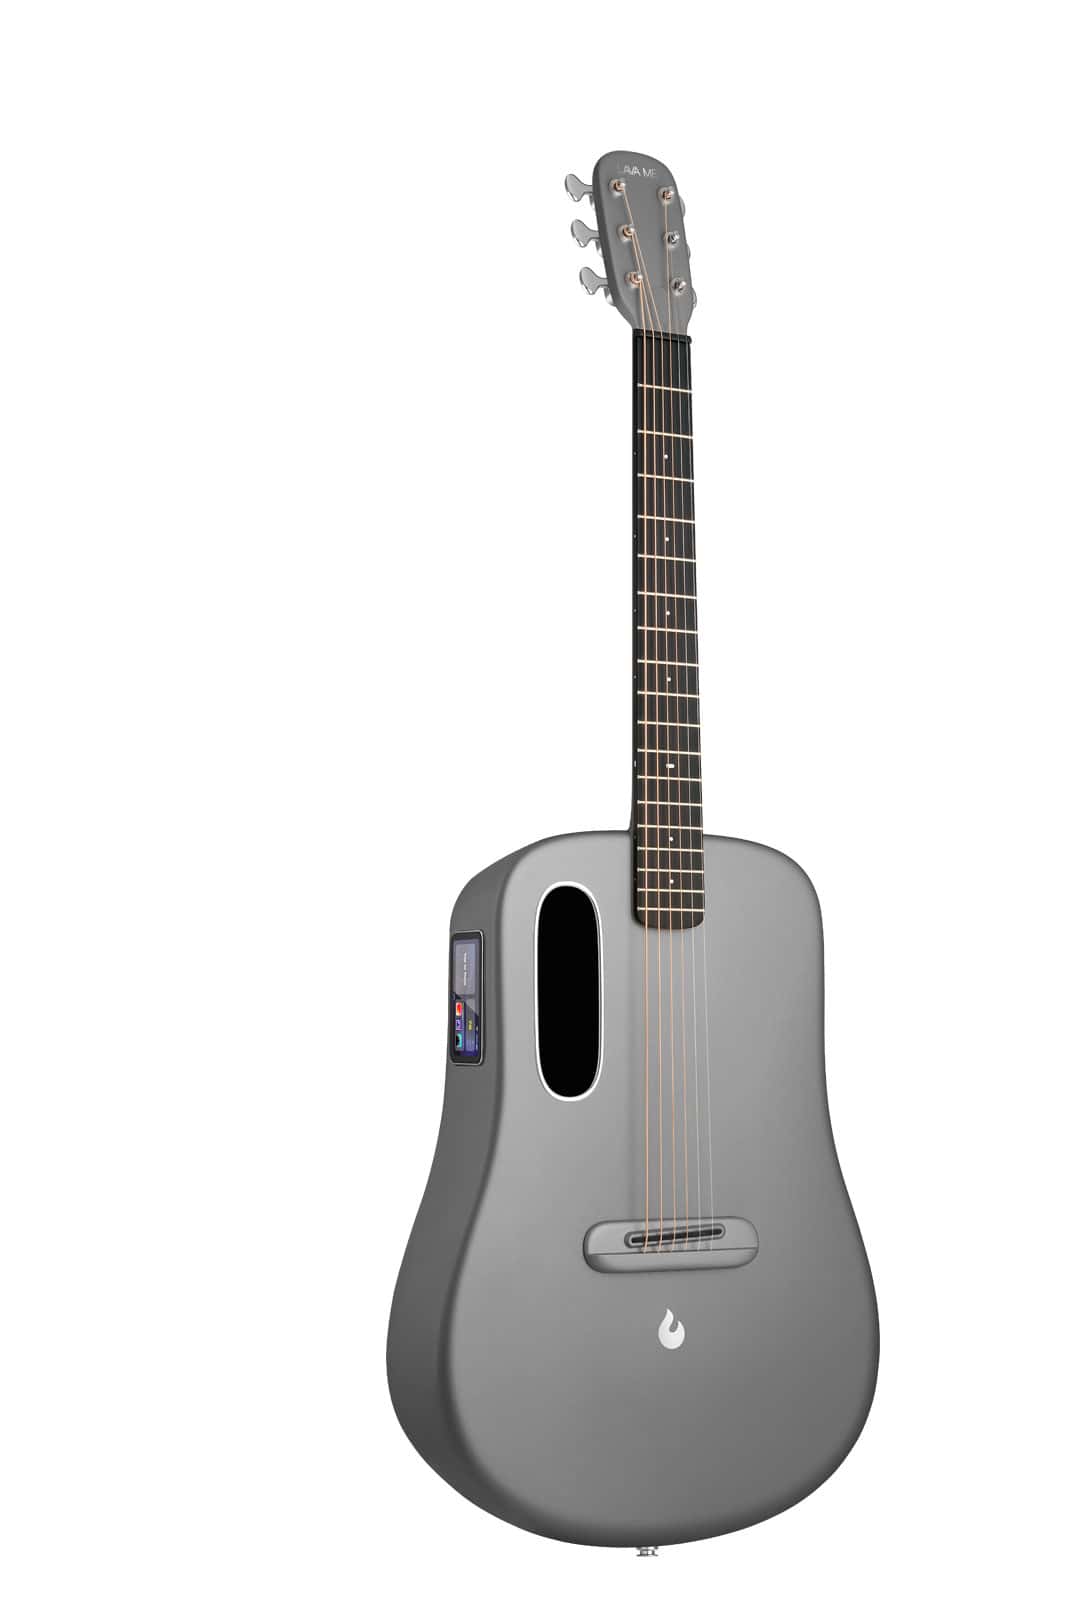 LAVA MUSIC LAVA ME 4 CARBON SERIES 36'' SPACE GREY - WITH SPACE BAG